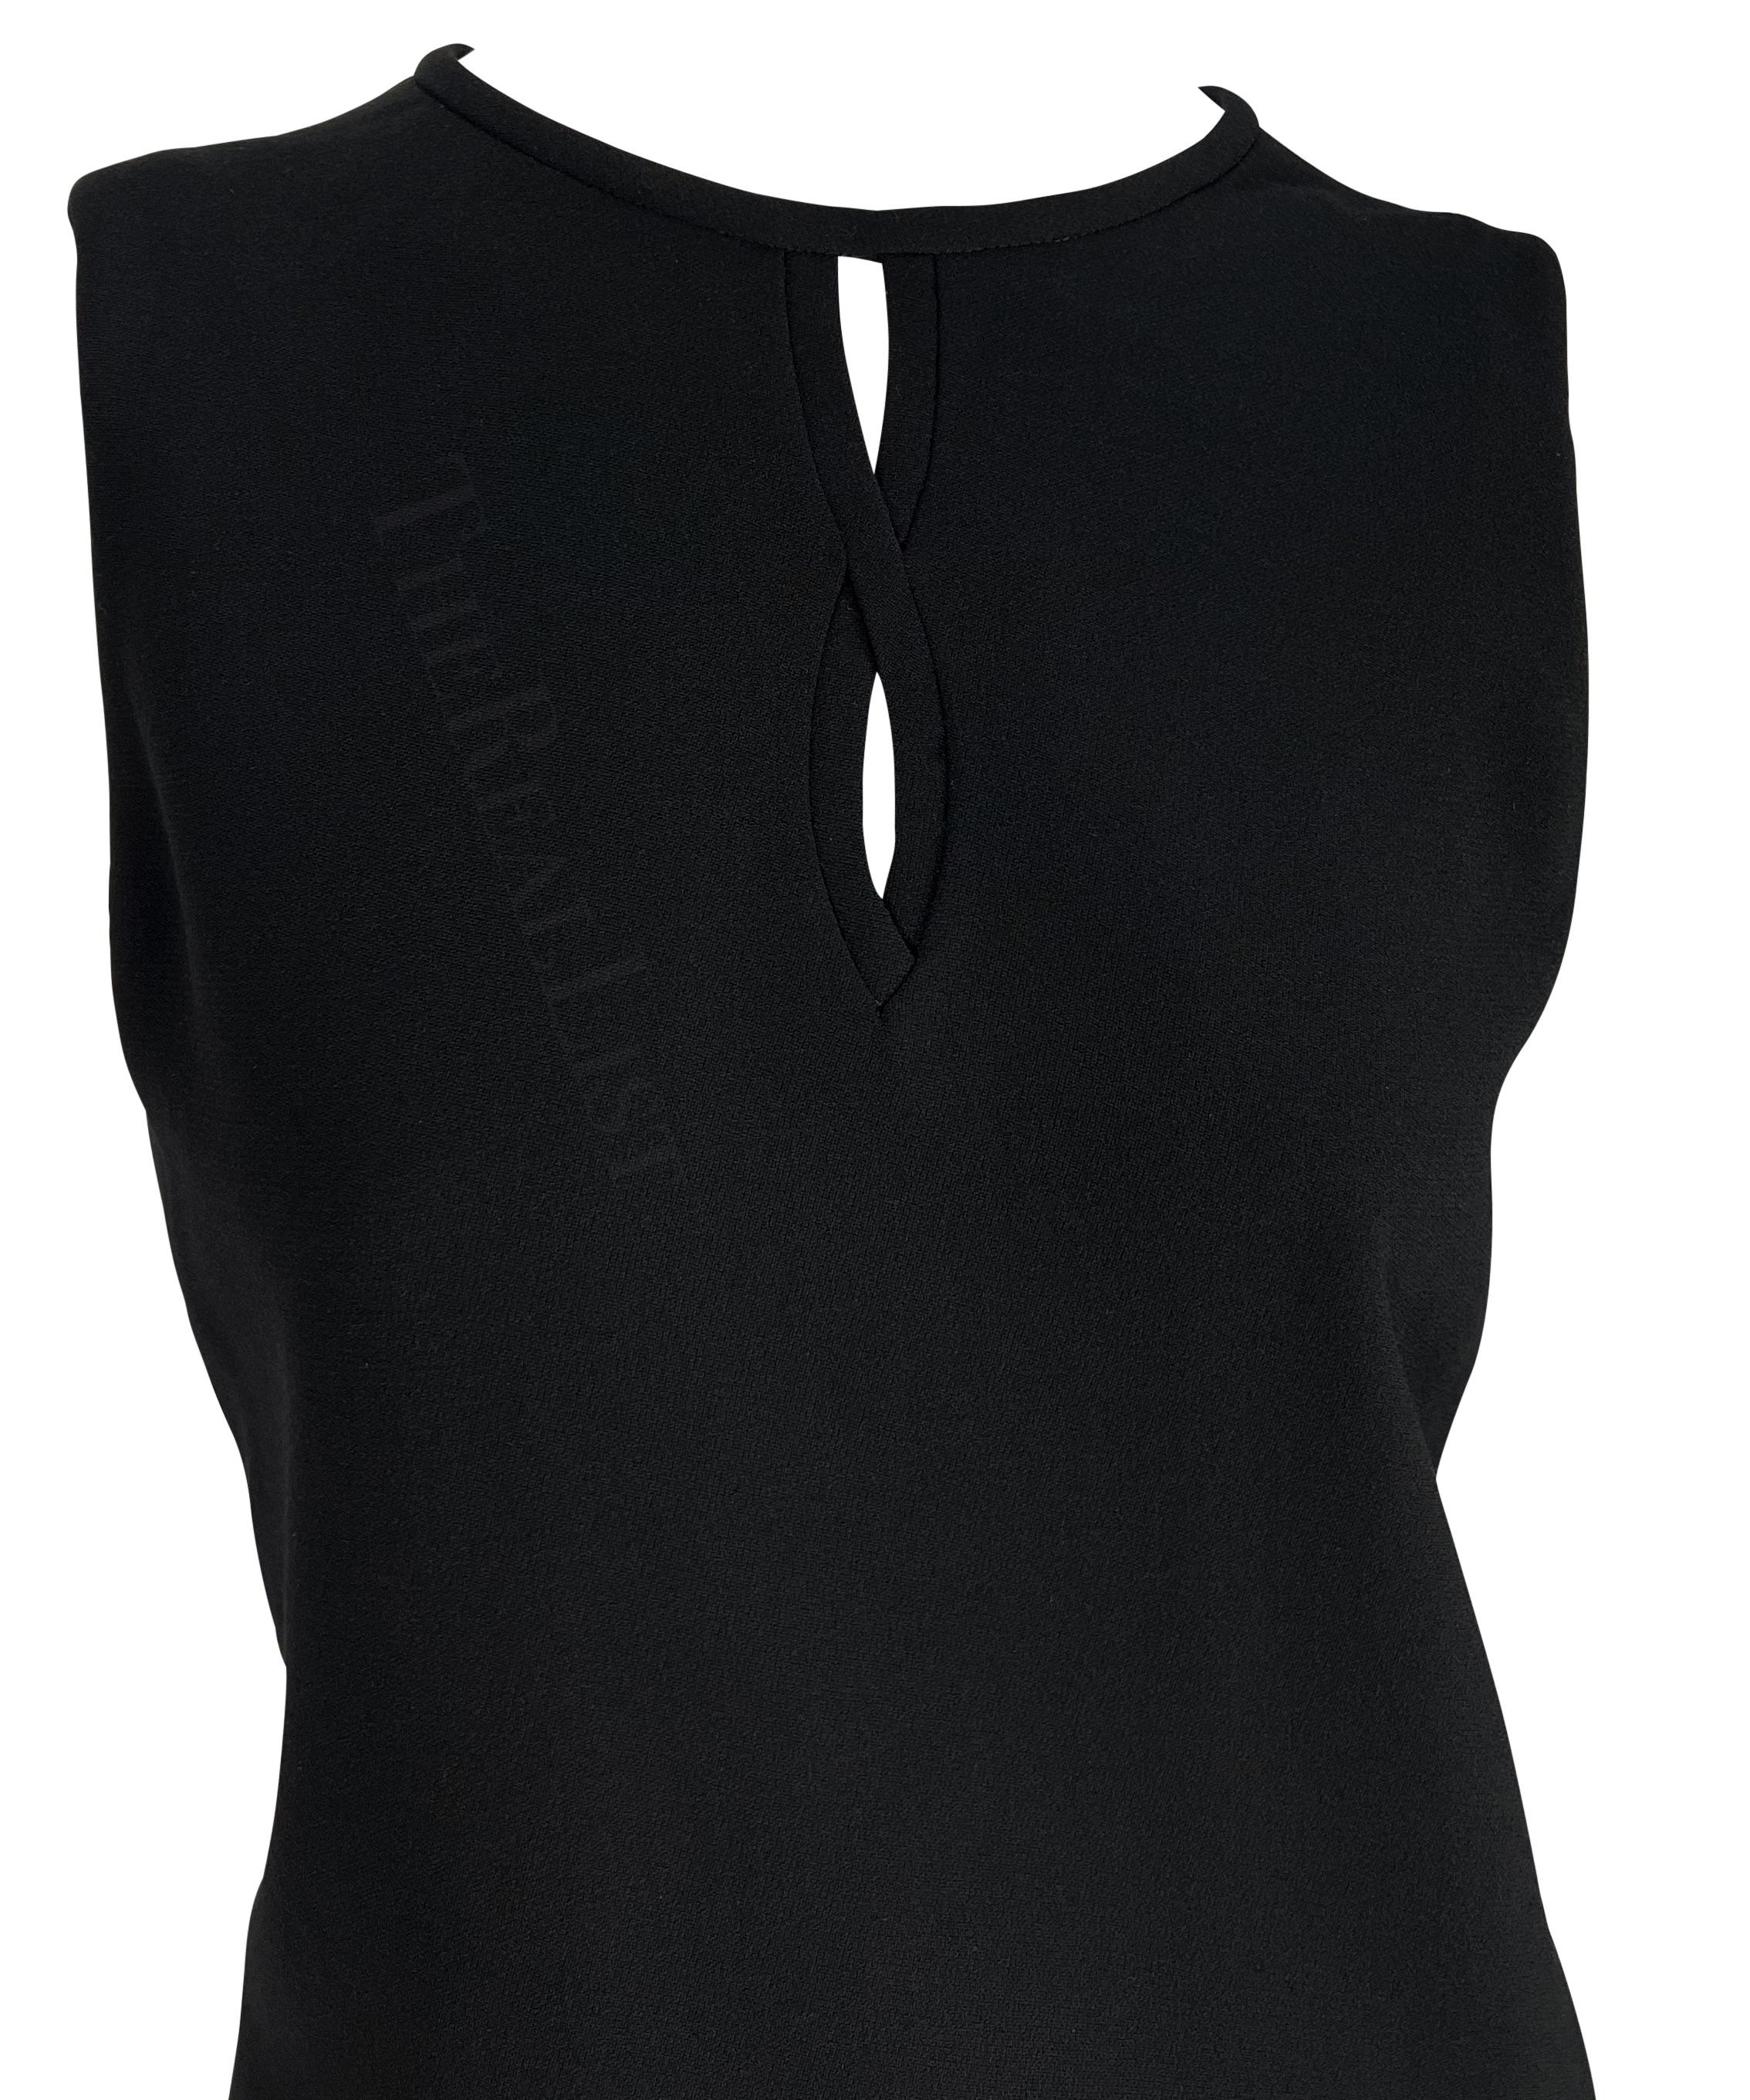 Presenting a fabulous black Gianni Versace tunic dress, designed by Gianni Versace. From the Fall/Winter 1997 collection, this chic sleeveless LBD features a crew neckline and cutouts between the breasts. Never worn before, this dress comes with the